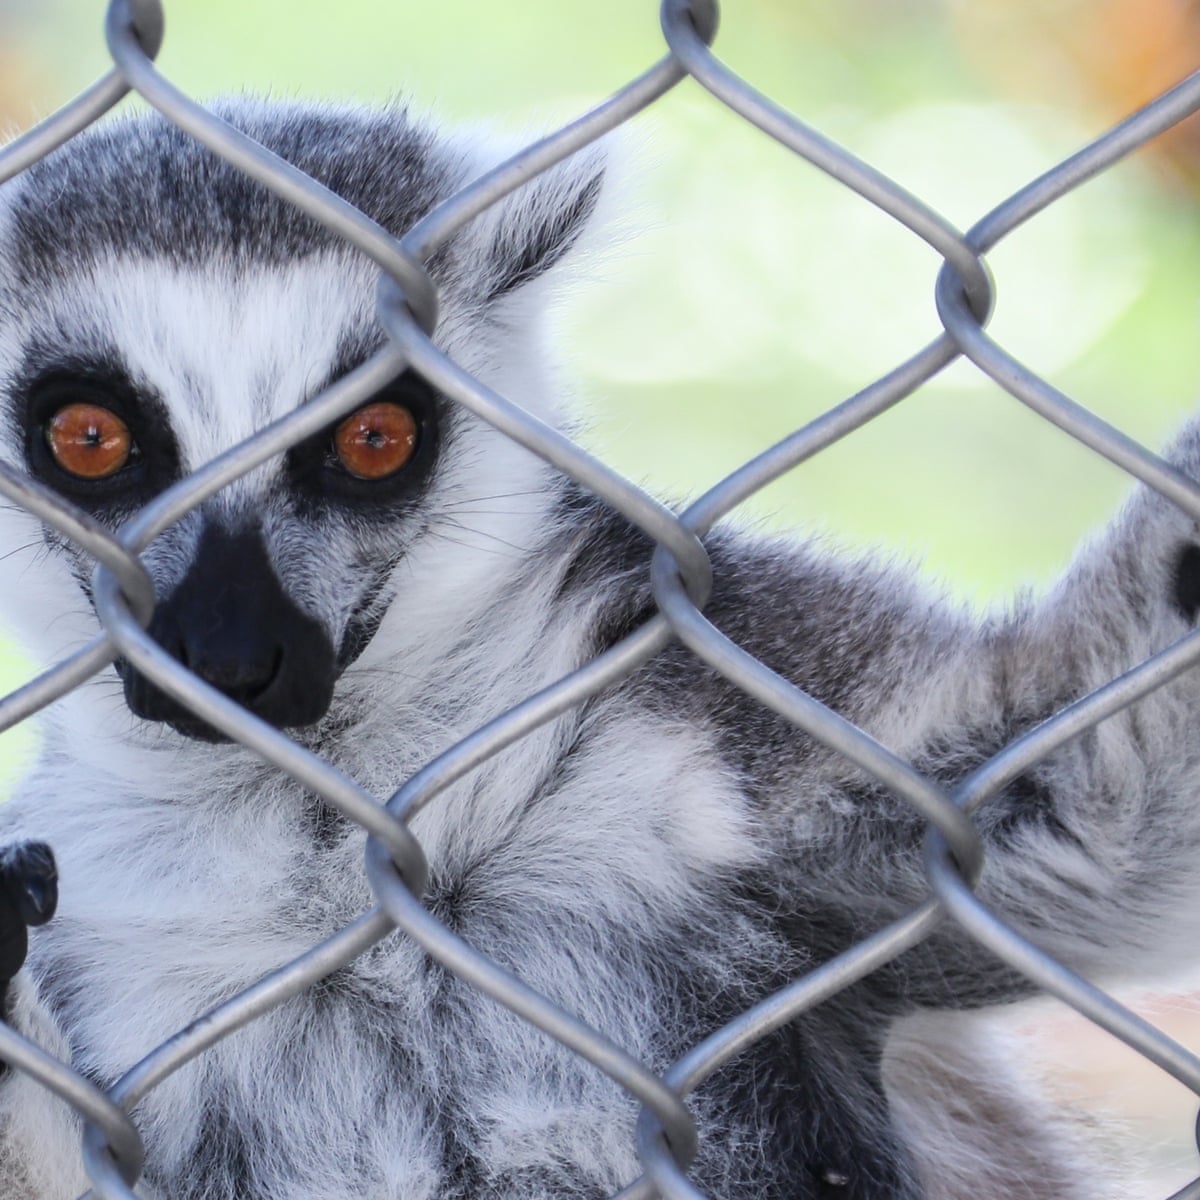 Case of the stolen lemur: man who took animal from US zoo wanted a monkey |  California | The Guardian